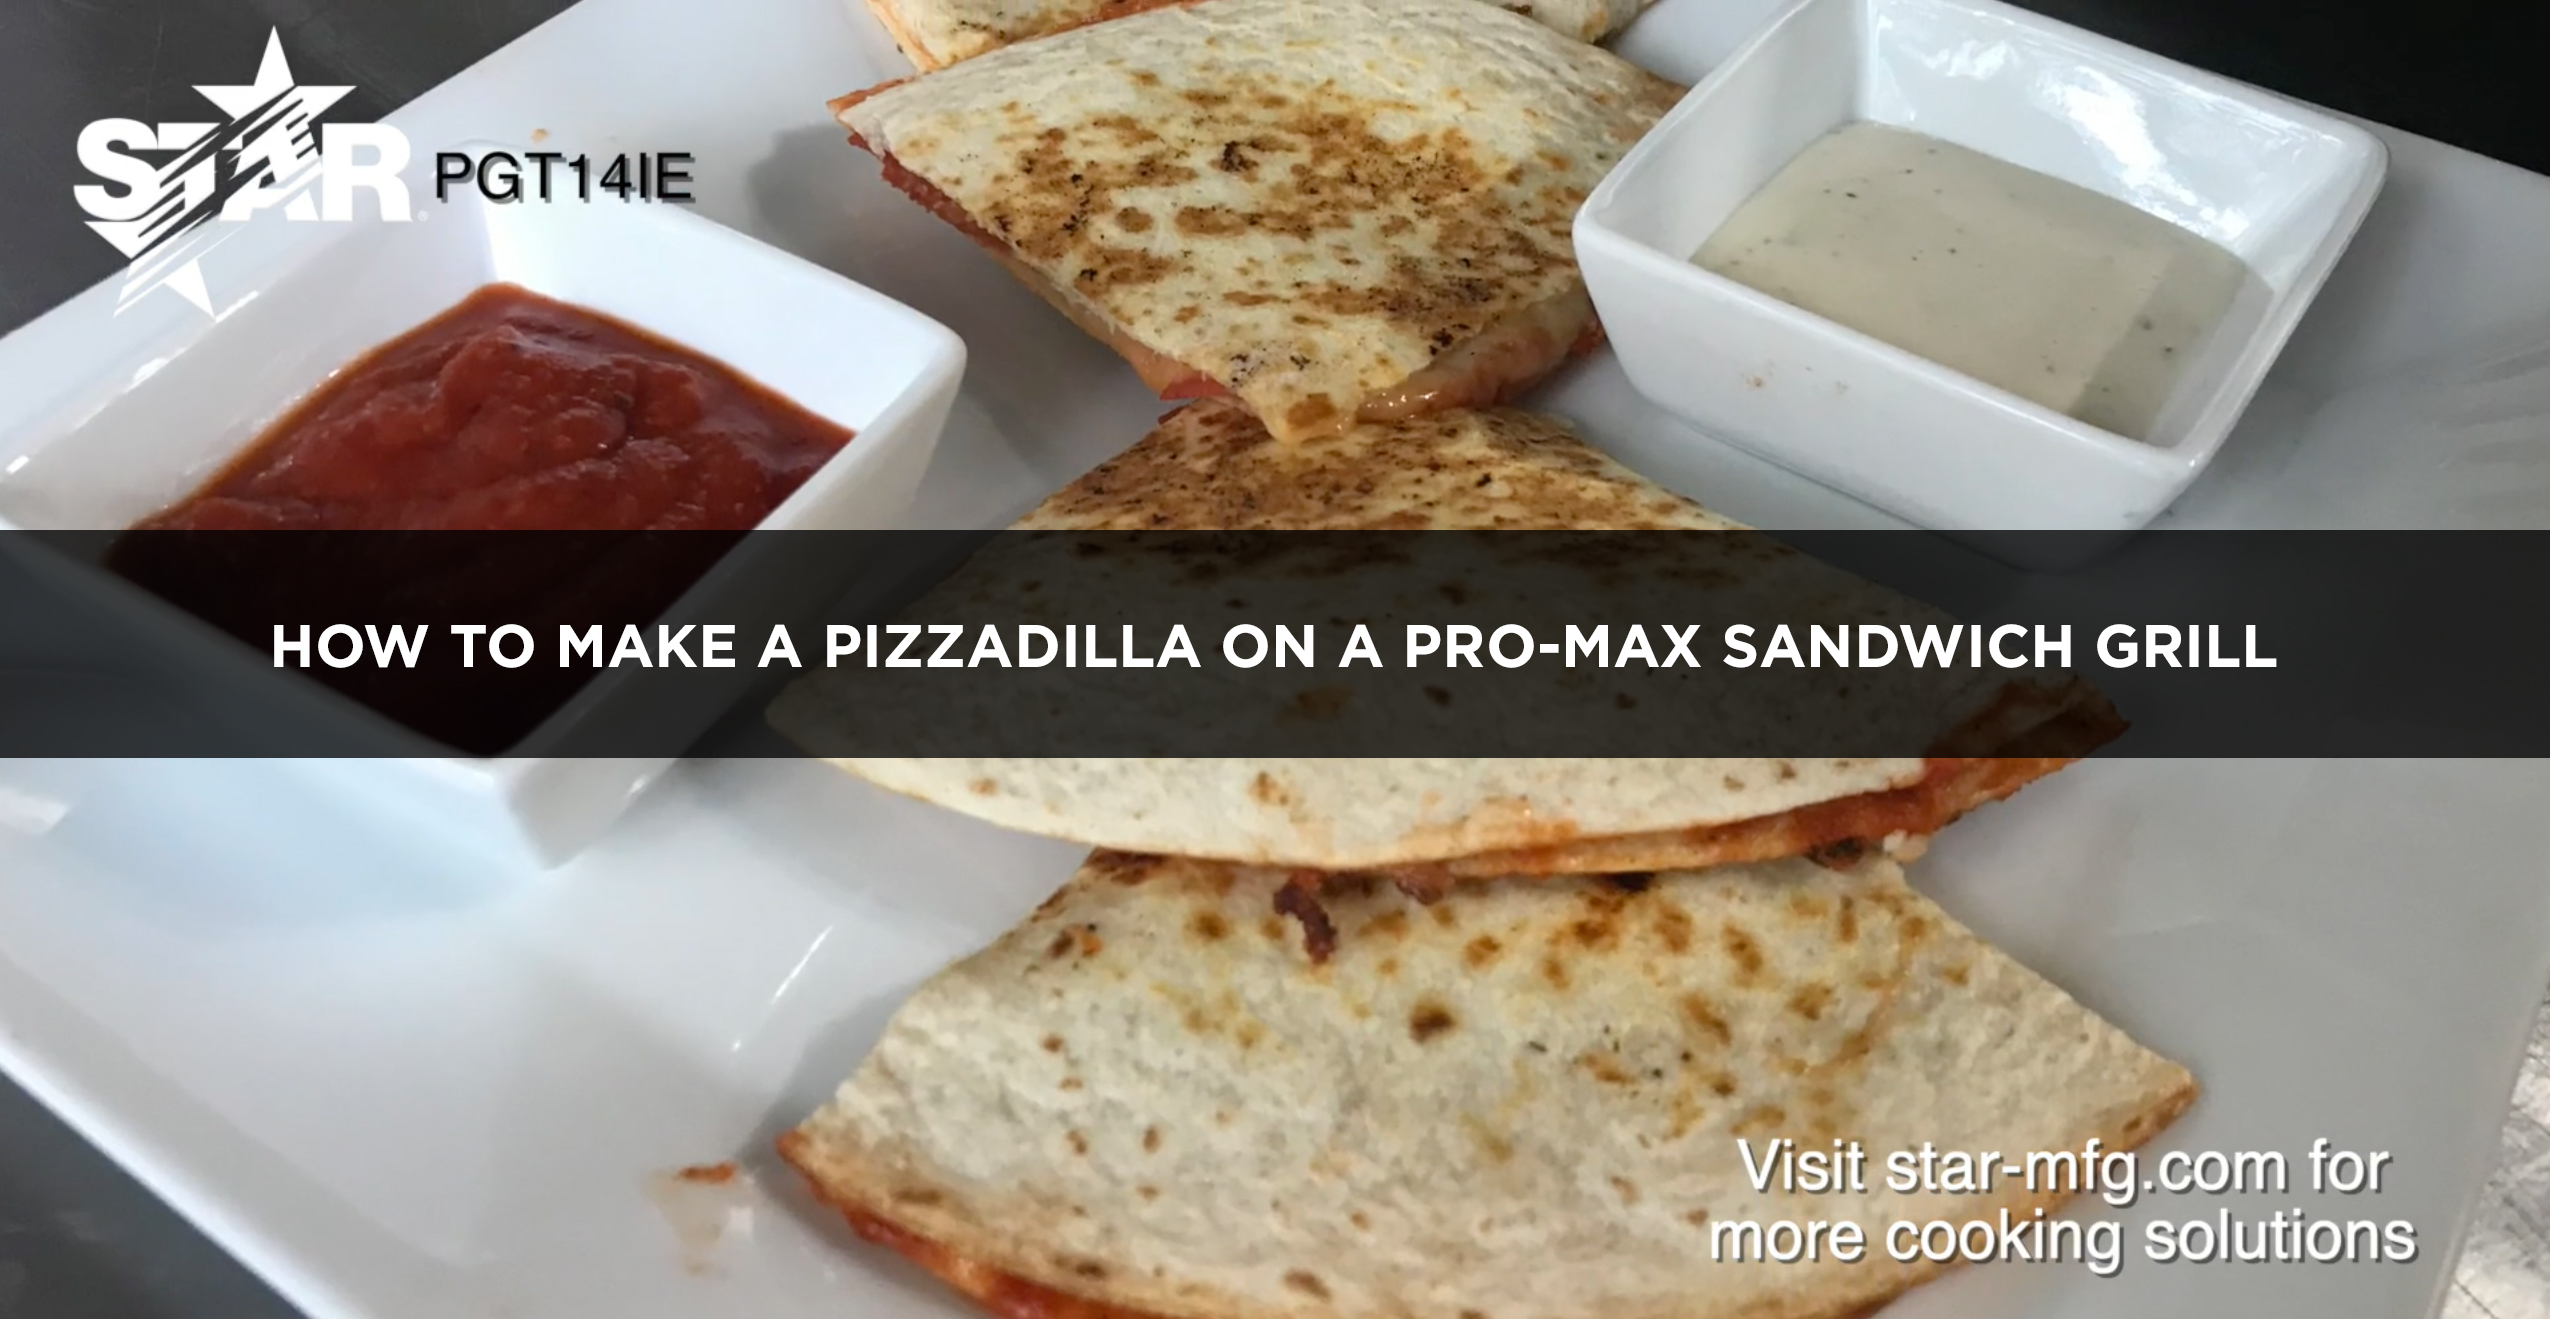 How to make a pizzadilla on a Star Pro-Max Sandwich Grill.